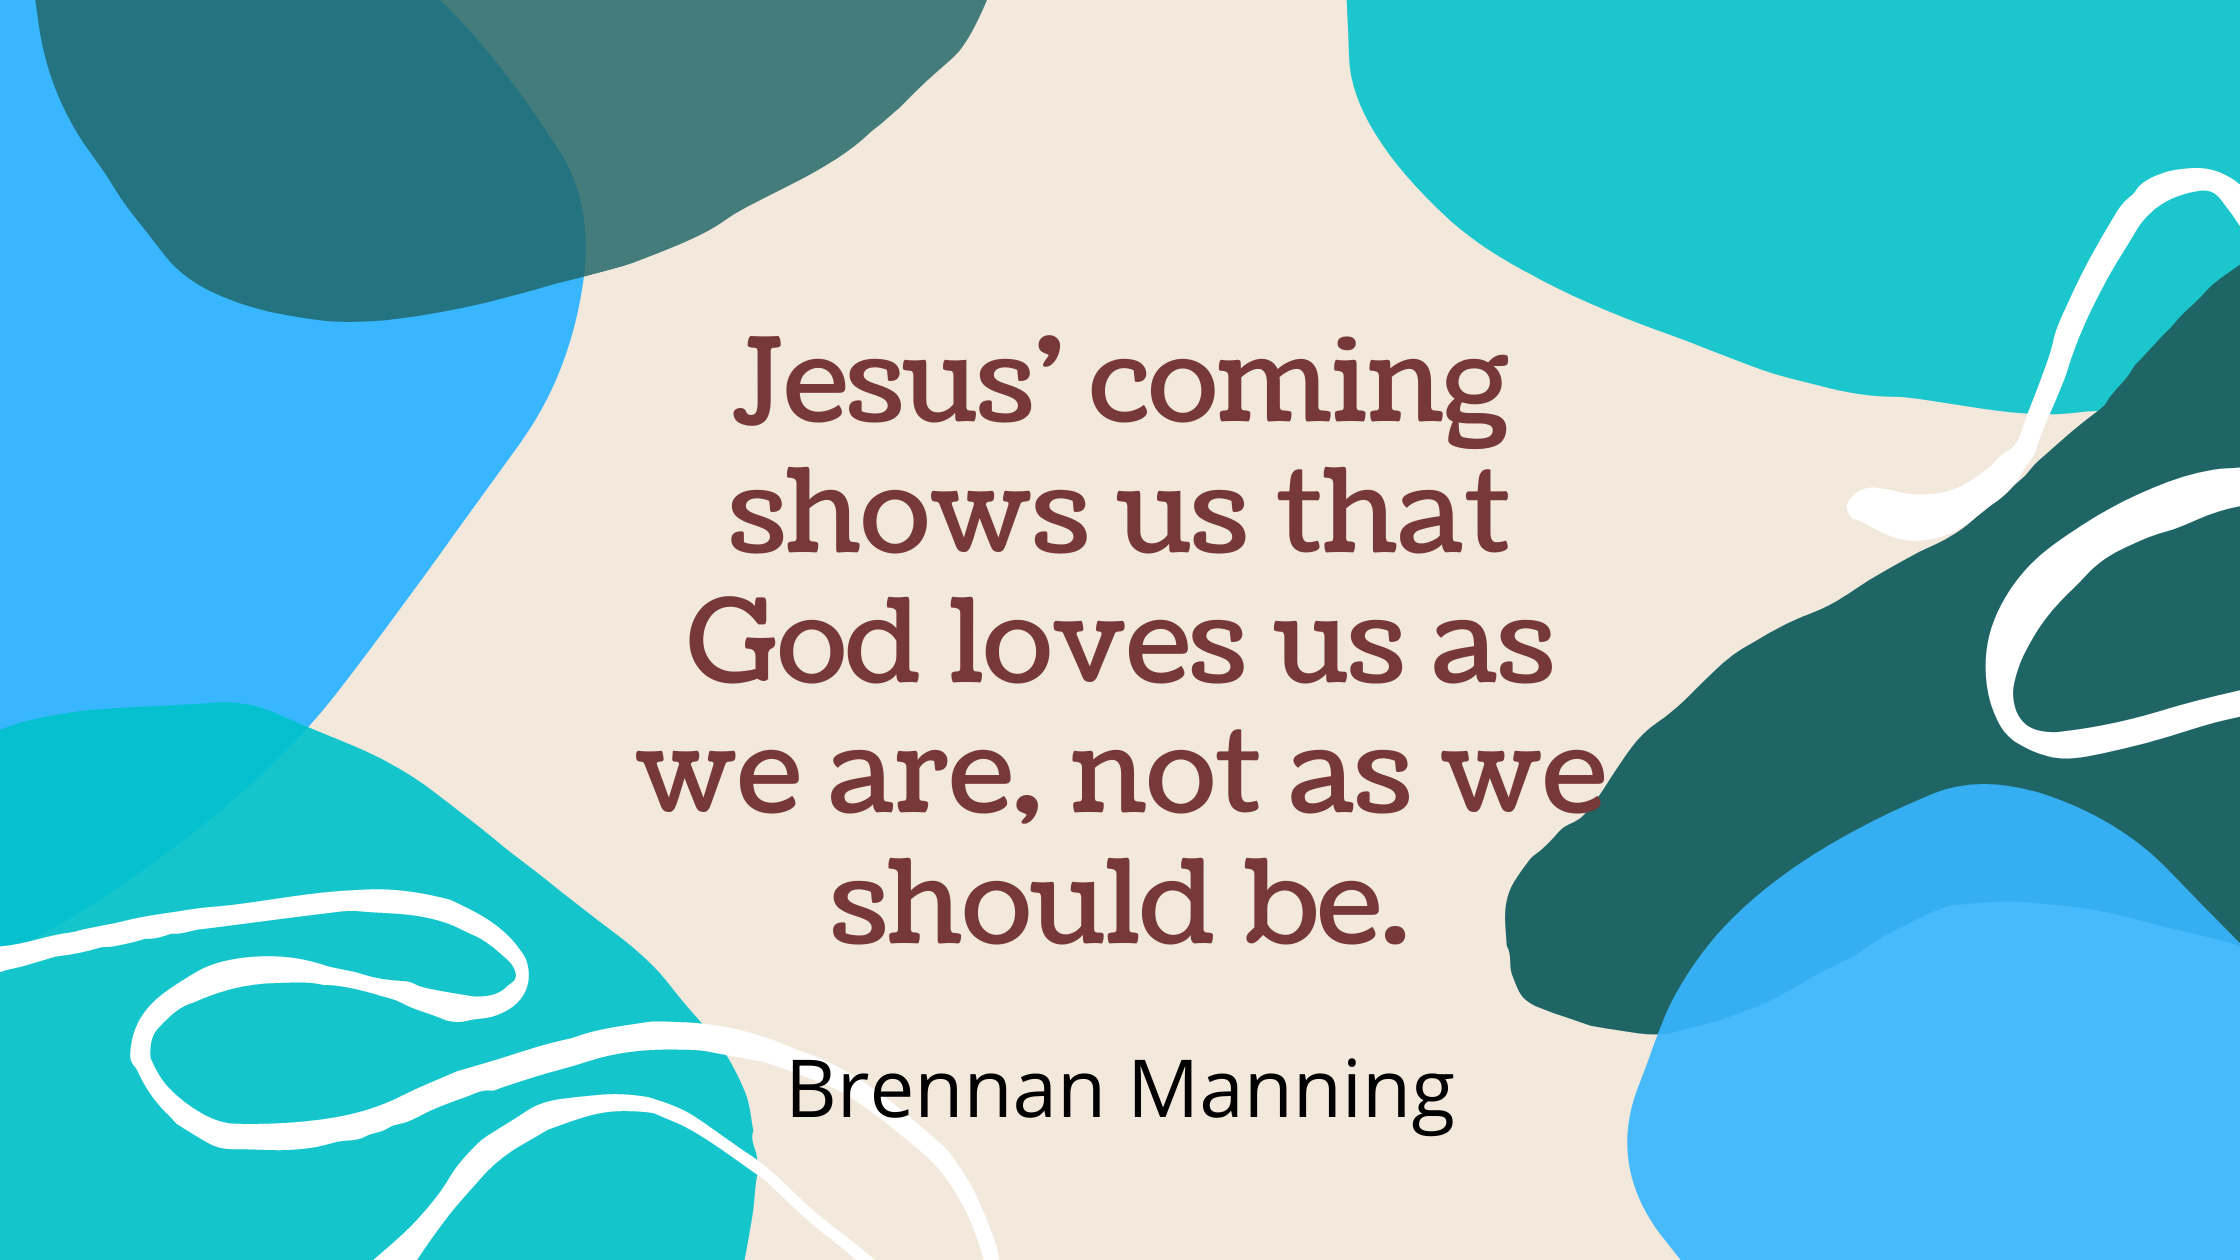 Jesus’ coming shows us that God loves us as we are, not as we should be.